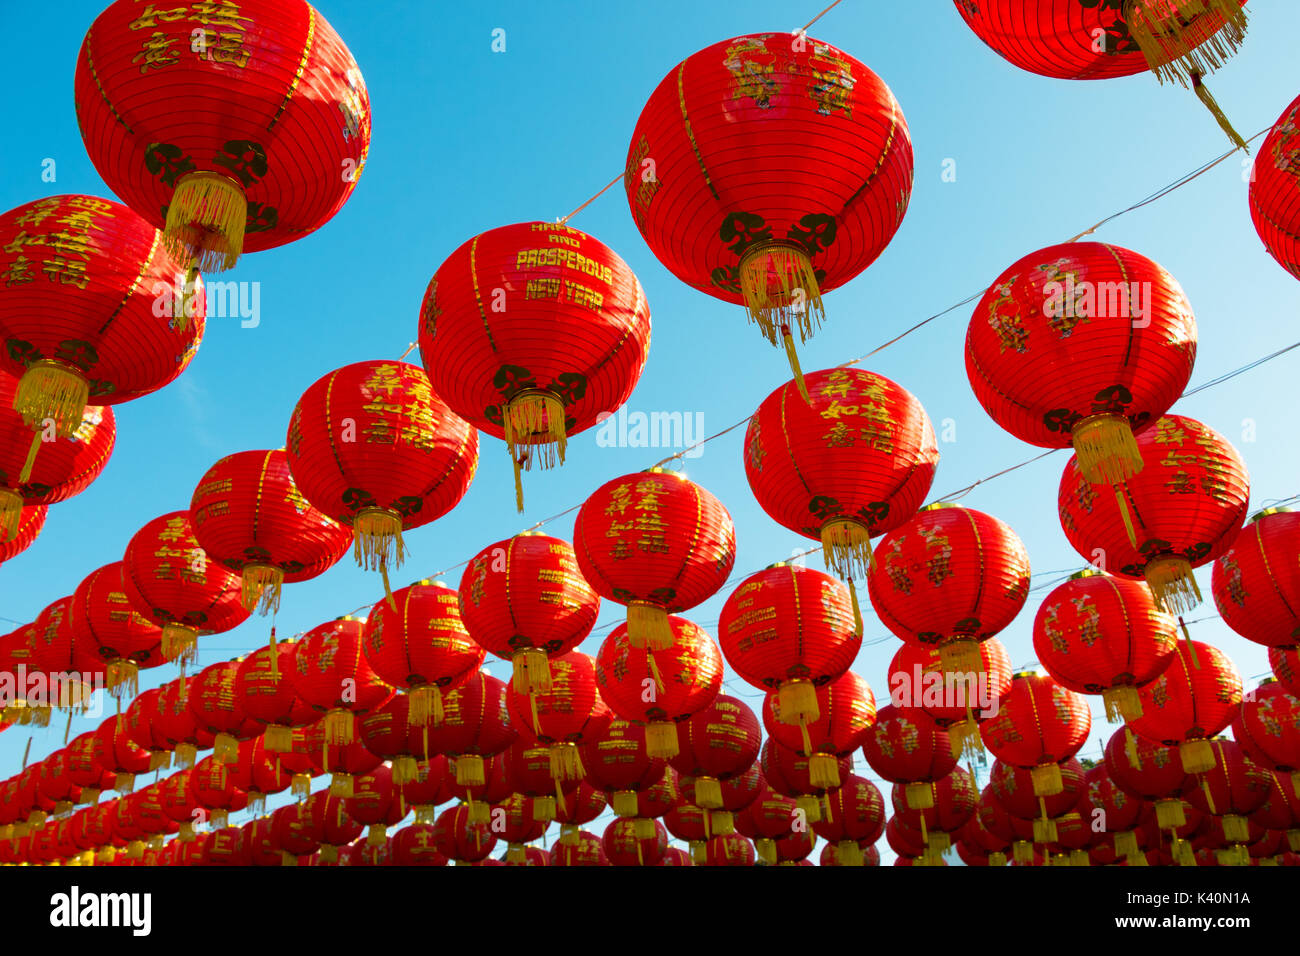 Chinese lanterns hanging on a clear blue sky Stock Photo